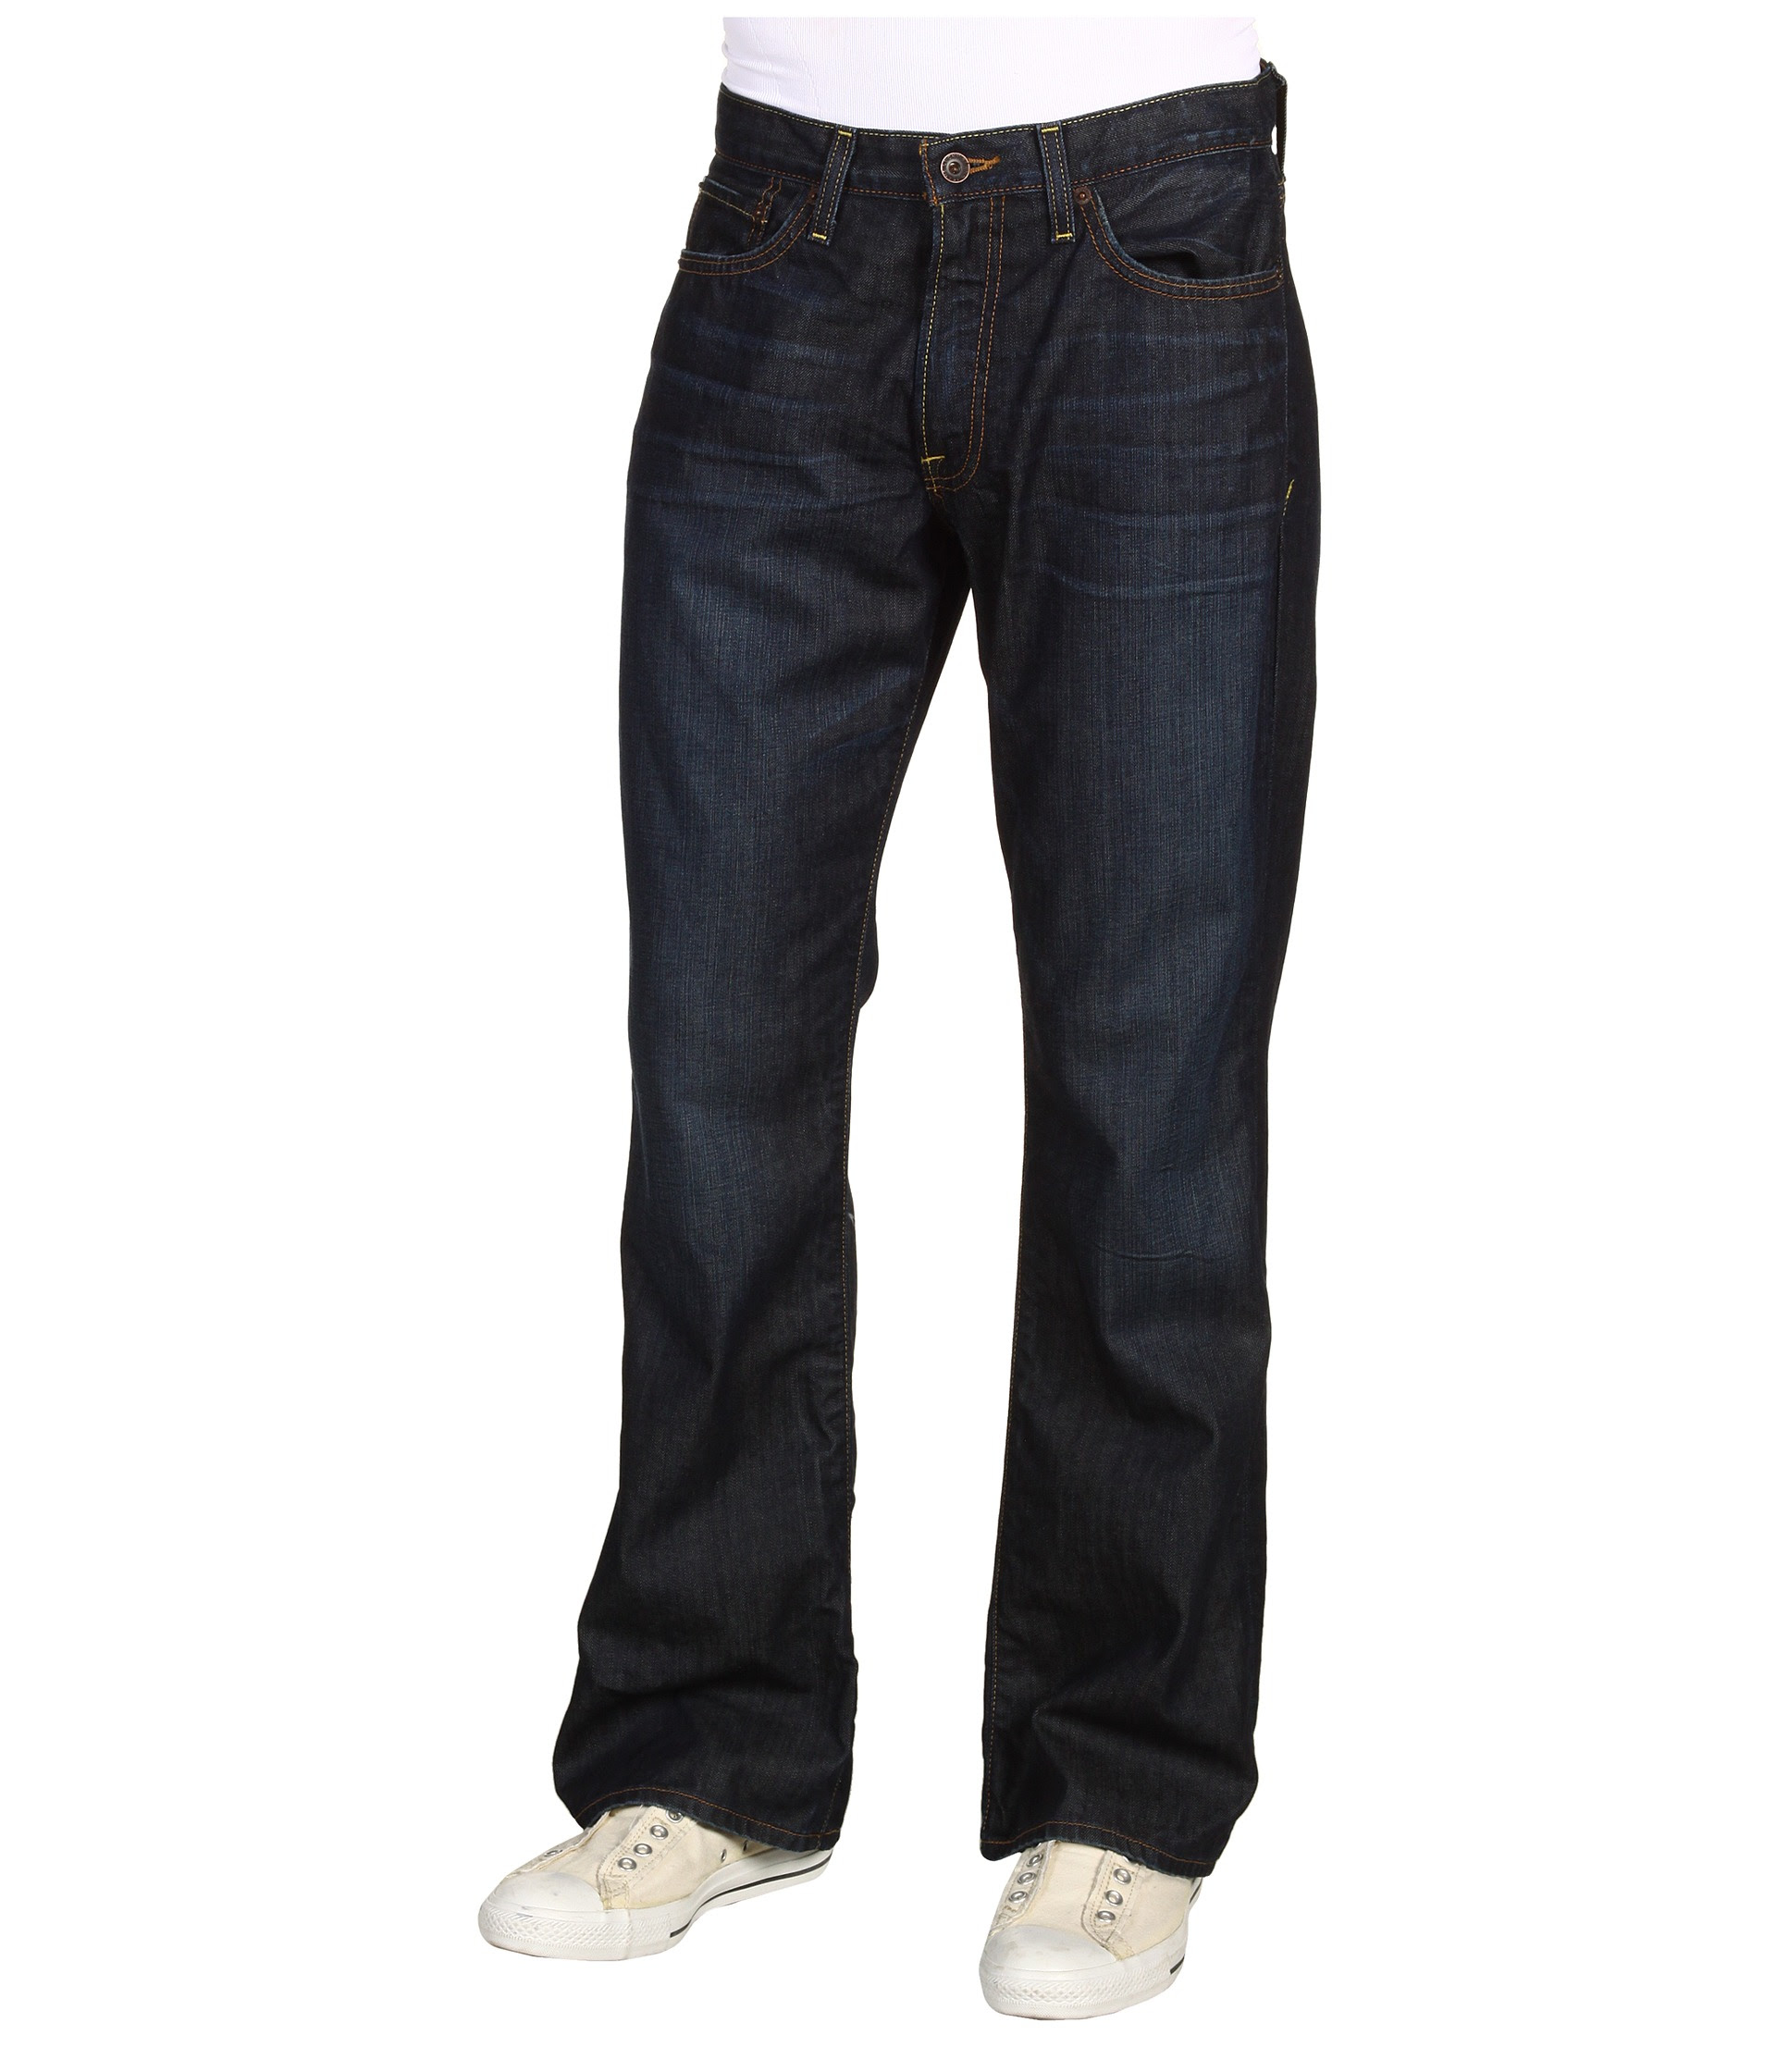 20 Luxury Lucky Brand Jeans Size Chart